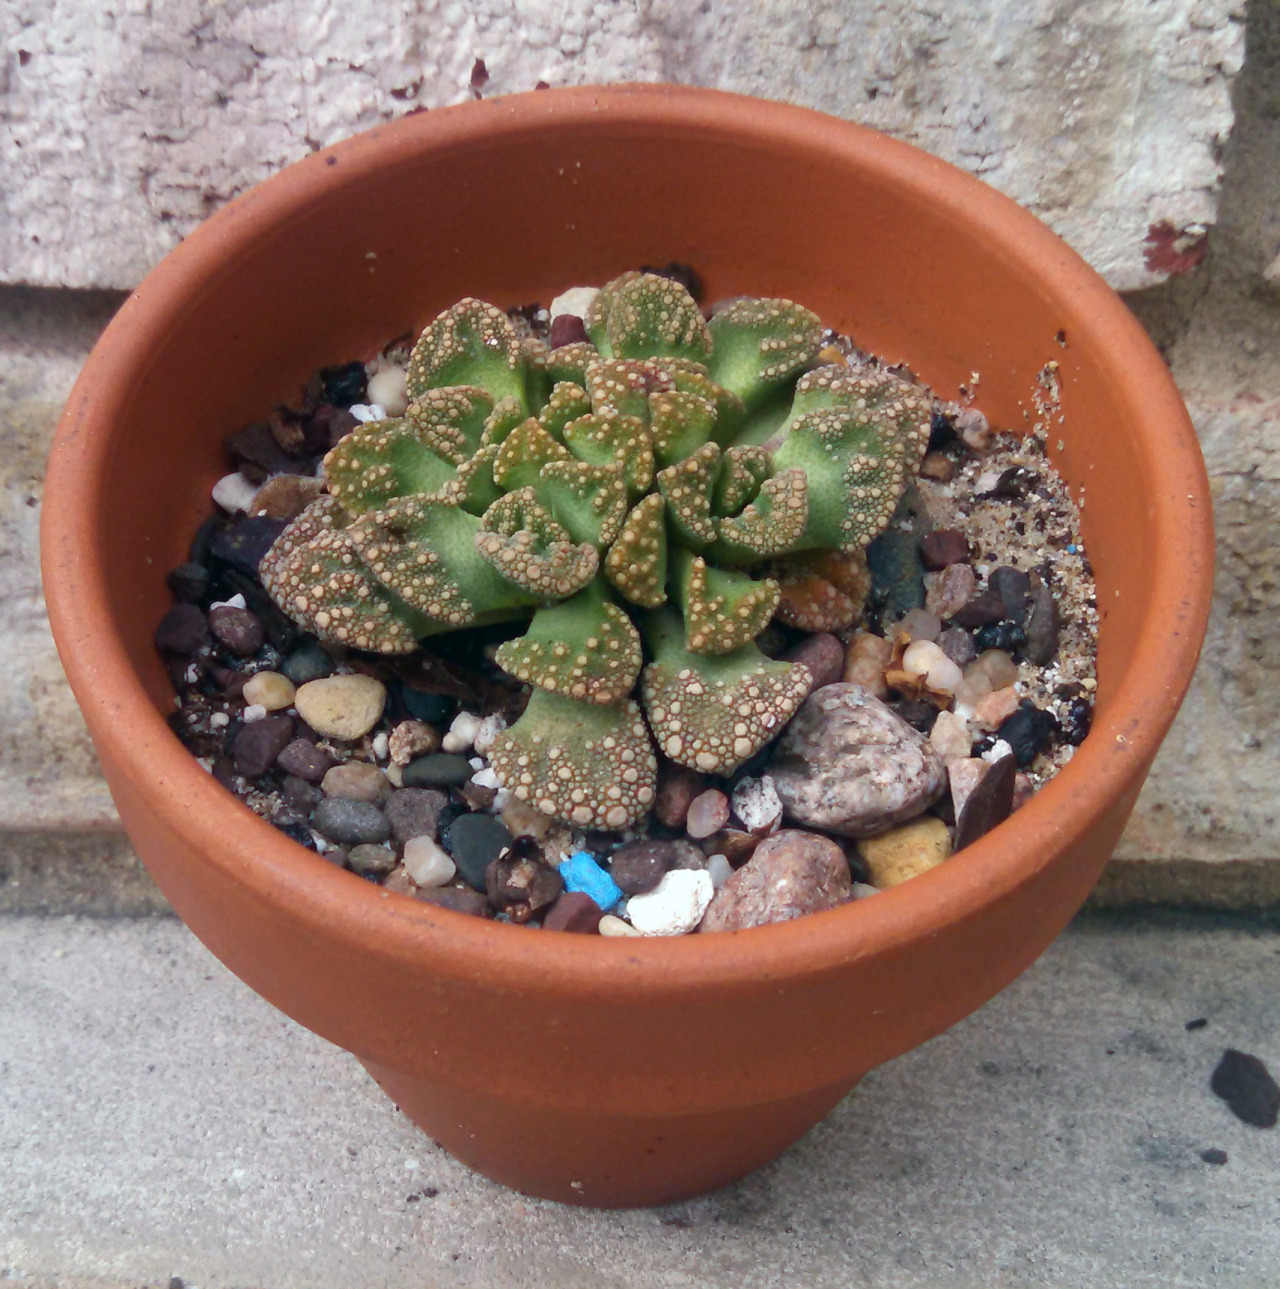 Titanopsis calcarea“My own personal Titanopsis calcarea has turned out to be an amazing plant, it is very low maintenance and has a distinct and interesting appearance, making it a personal favorite of mine as well as others I know. Actually one of...